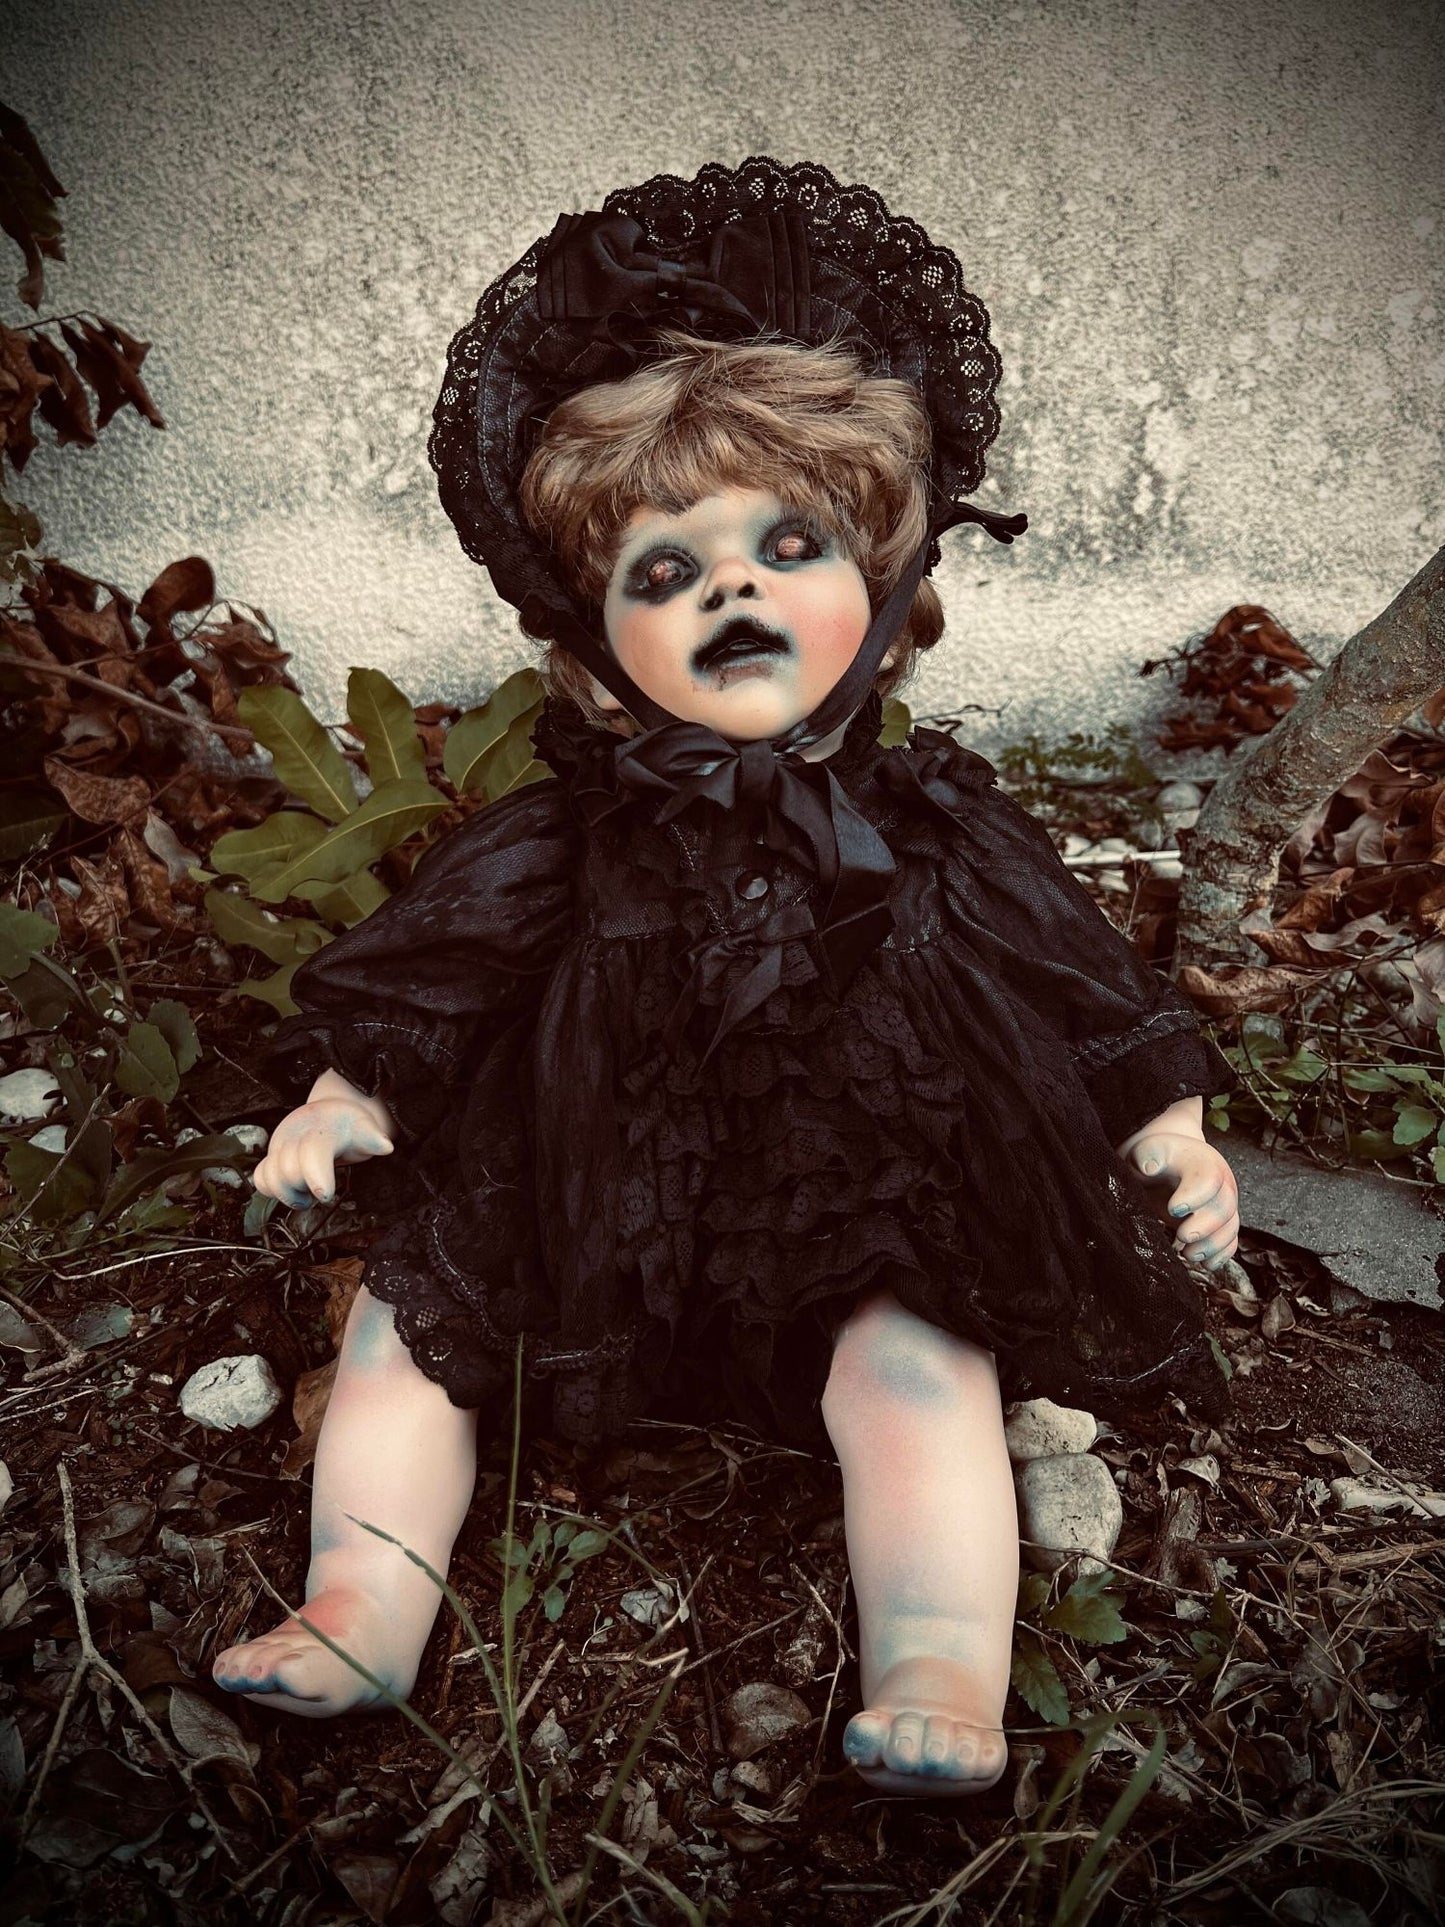 Meet Gwen 23" Doll Porcelain Witchy Creepy Haunted Spirit Infected Scary Spooky Zombie Possessed Gothic Positive Energy Undead Occult